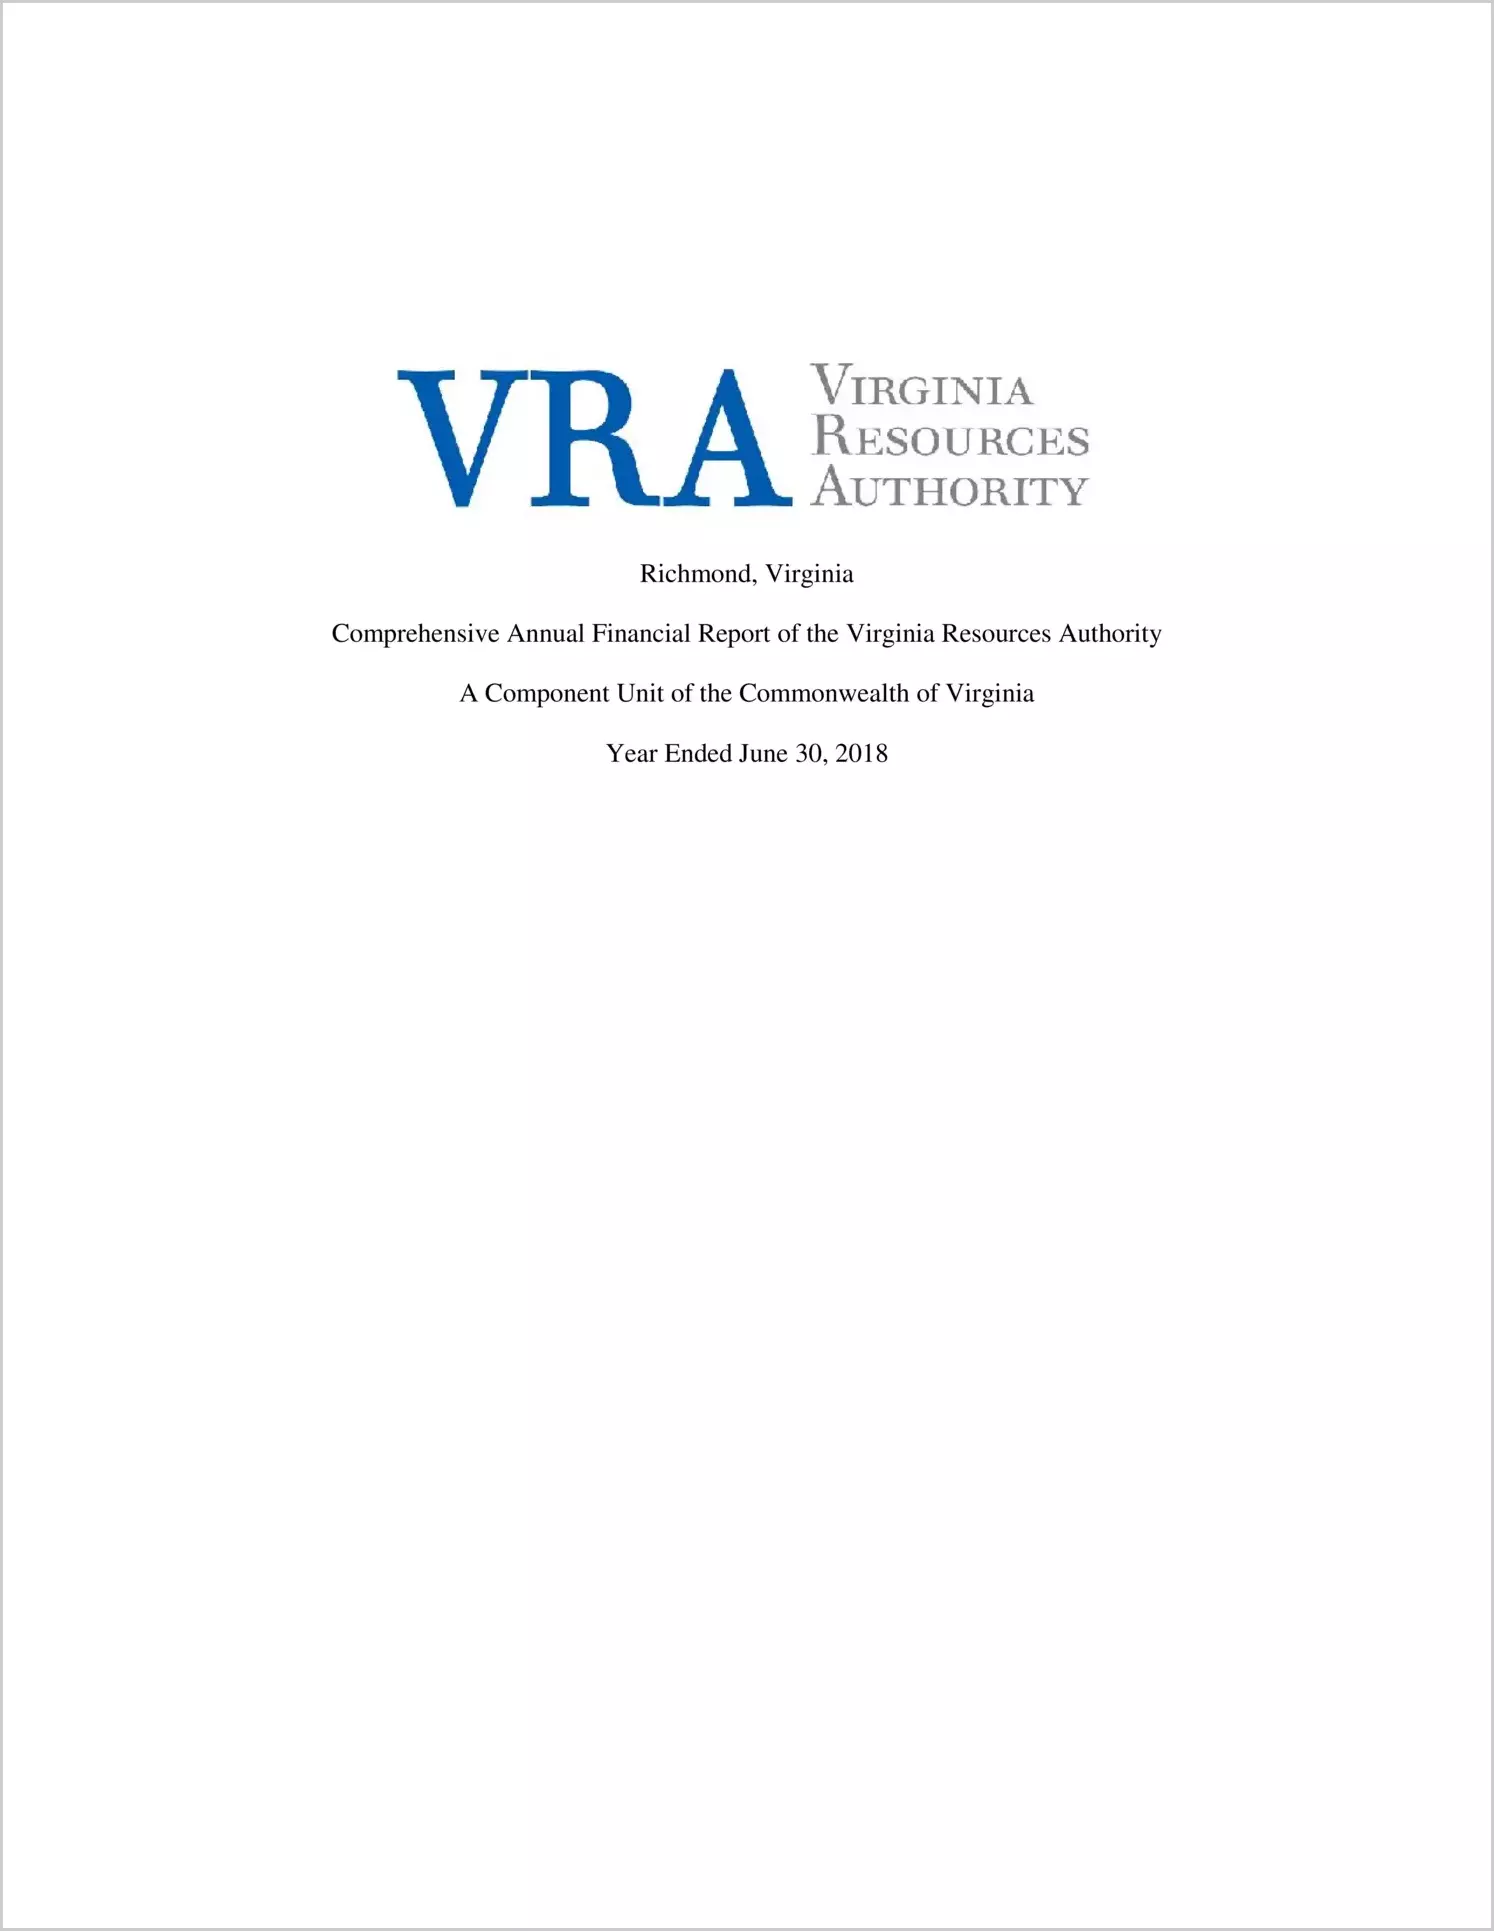 Virginia Resources Authority Financial Statements for the fiscal year ended June 30, 2018